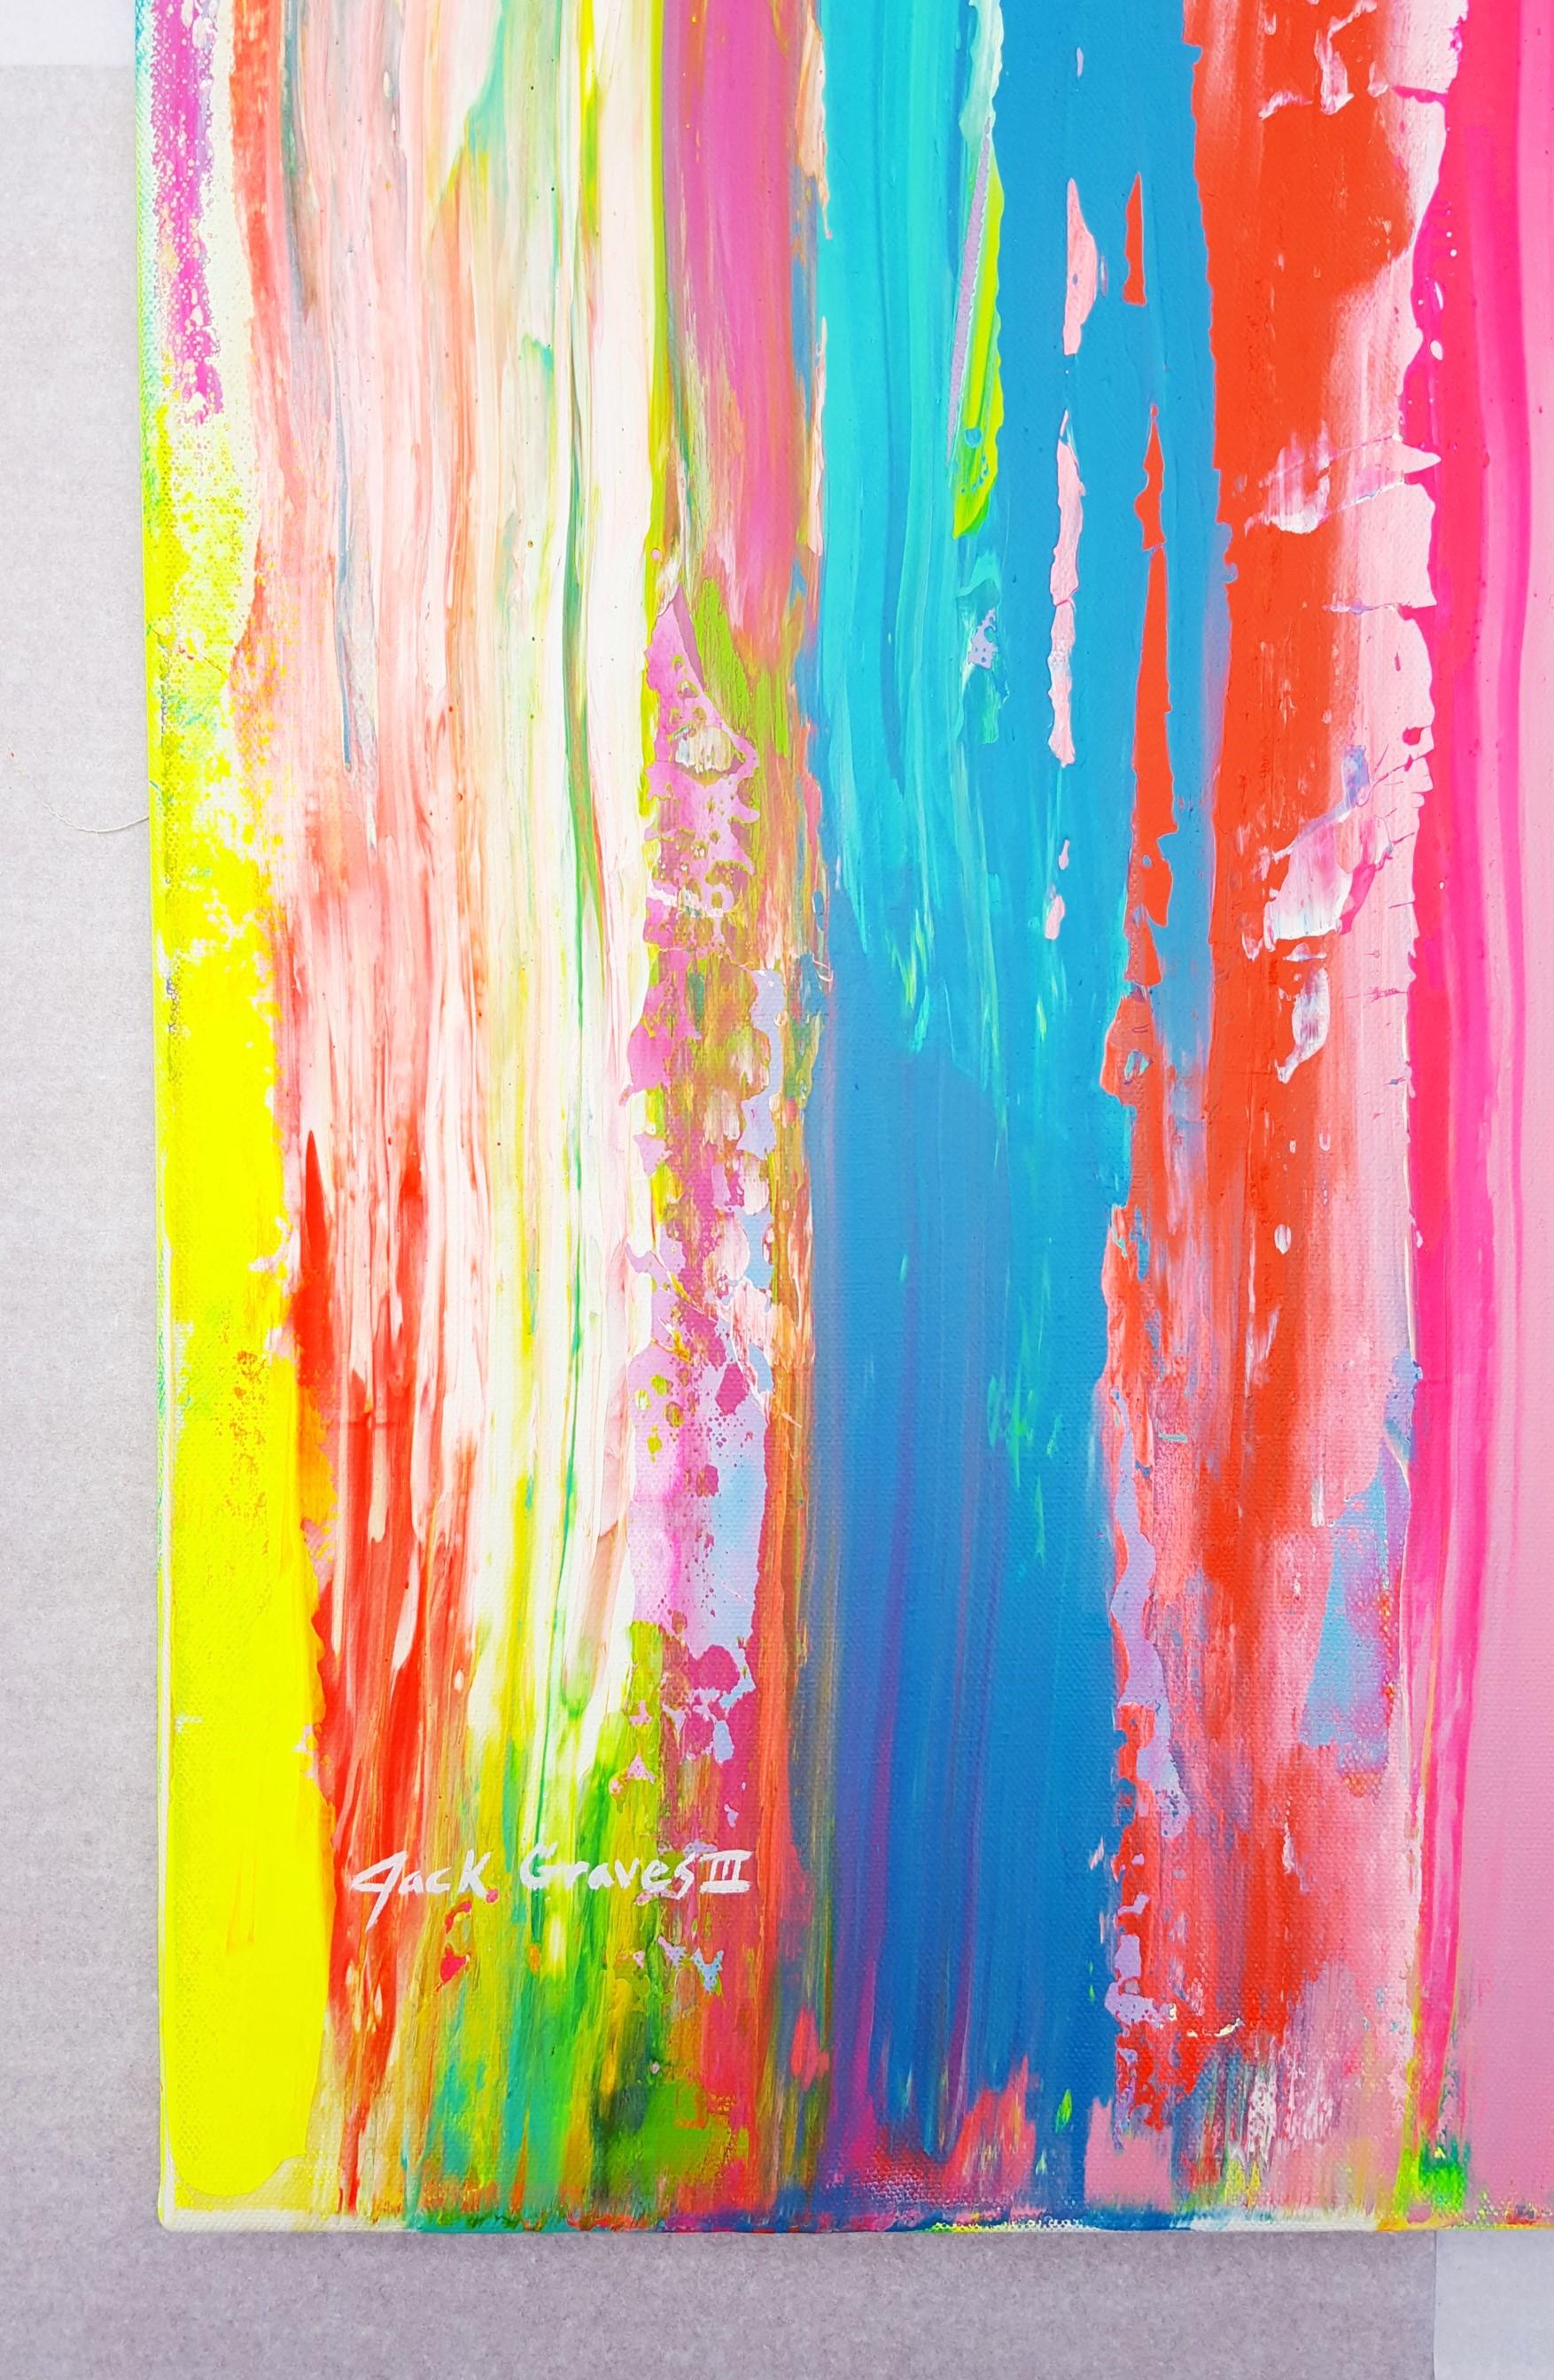 artist who throws paint on canvas